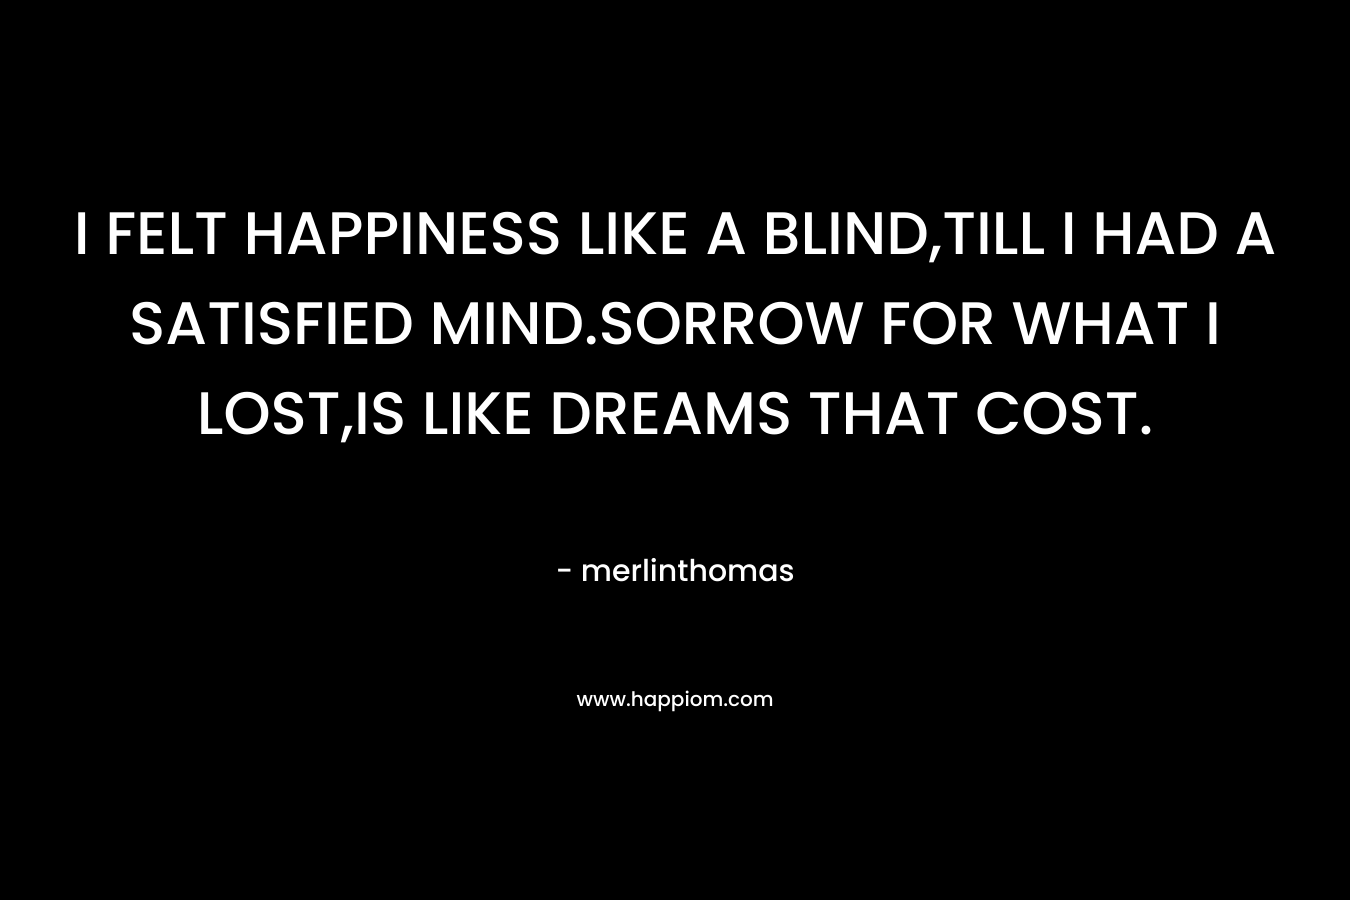 I FELT HAPPINESS LIKE A BLIND,TILL I HAD A SATISFIED MIND.SORROW FOR WHAT I LOST,IS LIKE DREAMS THAT COST.